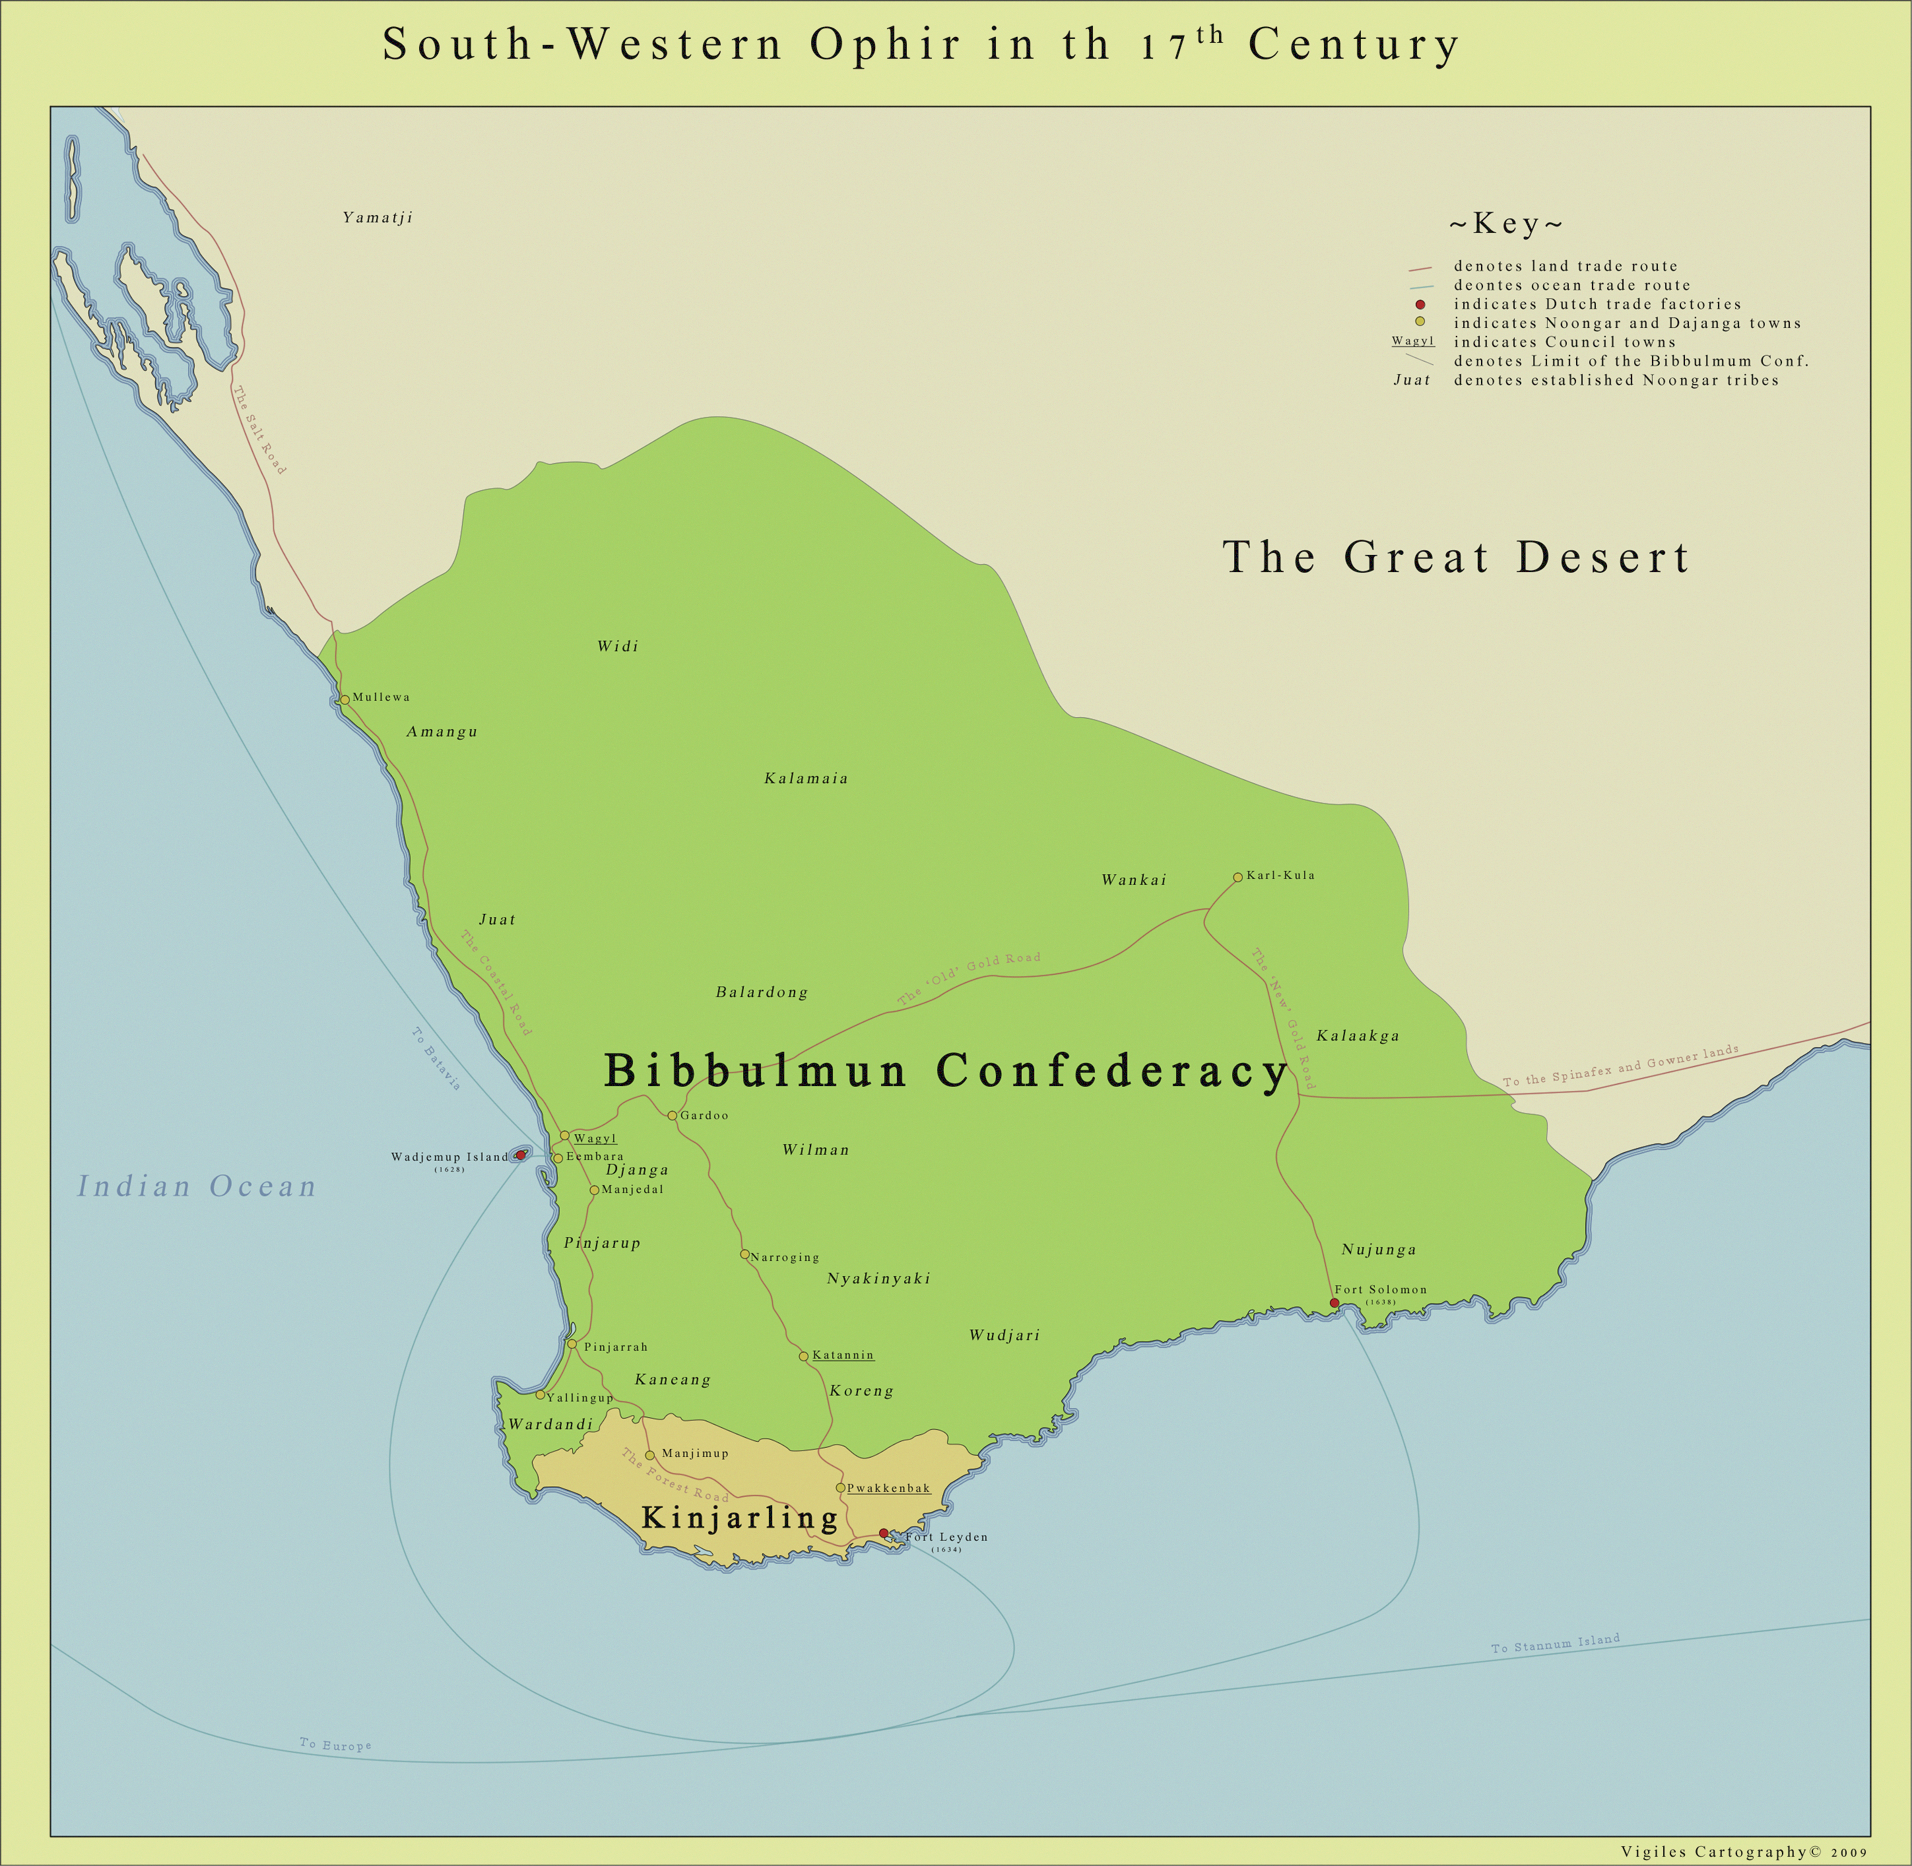 South_West_Ophir__17th_Century_by_Raven_the_5th.png